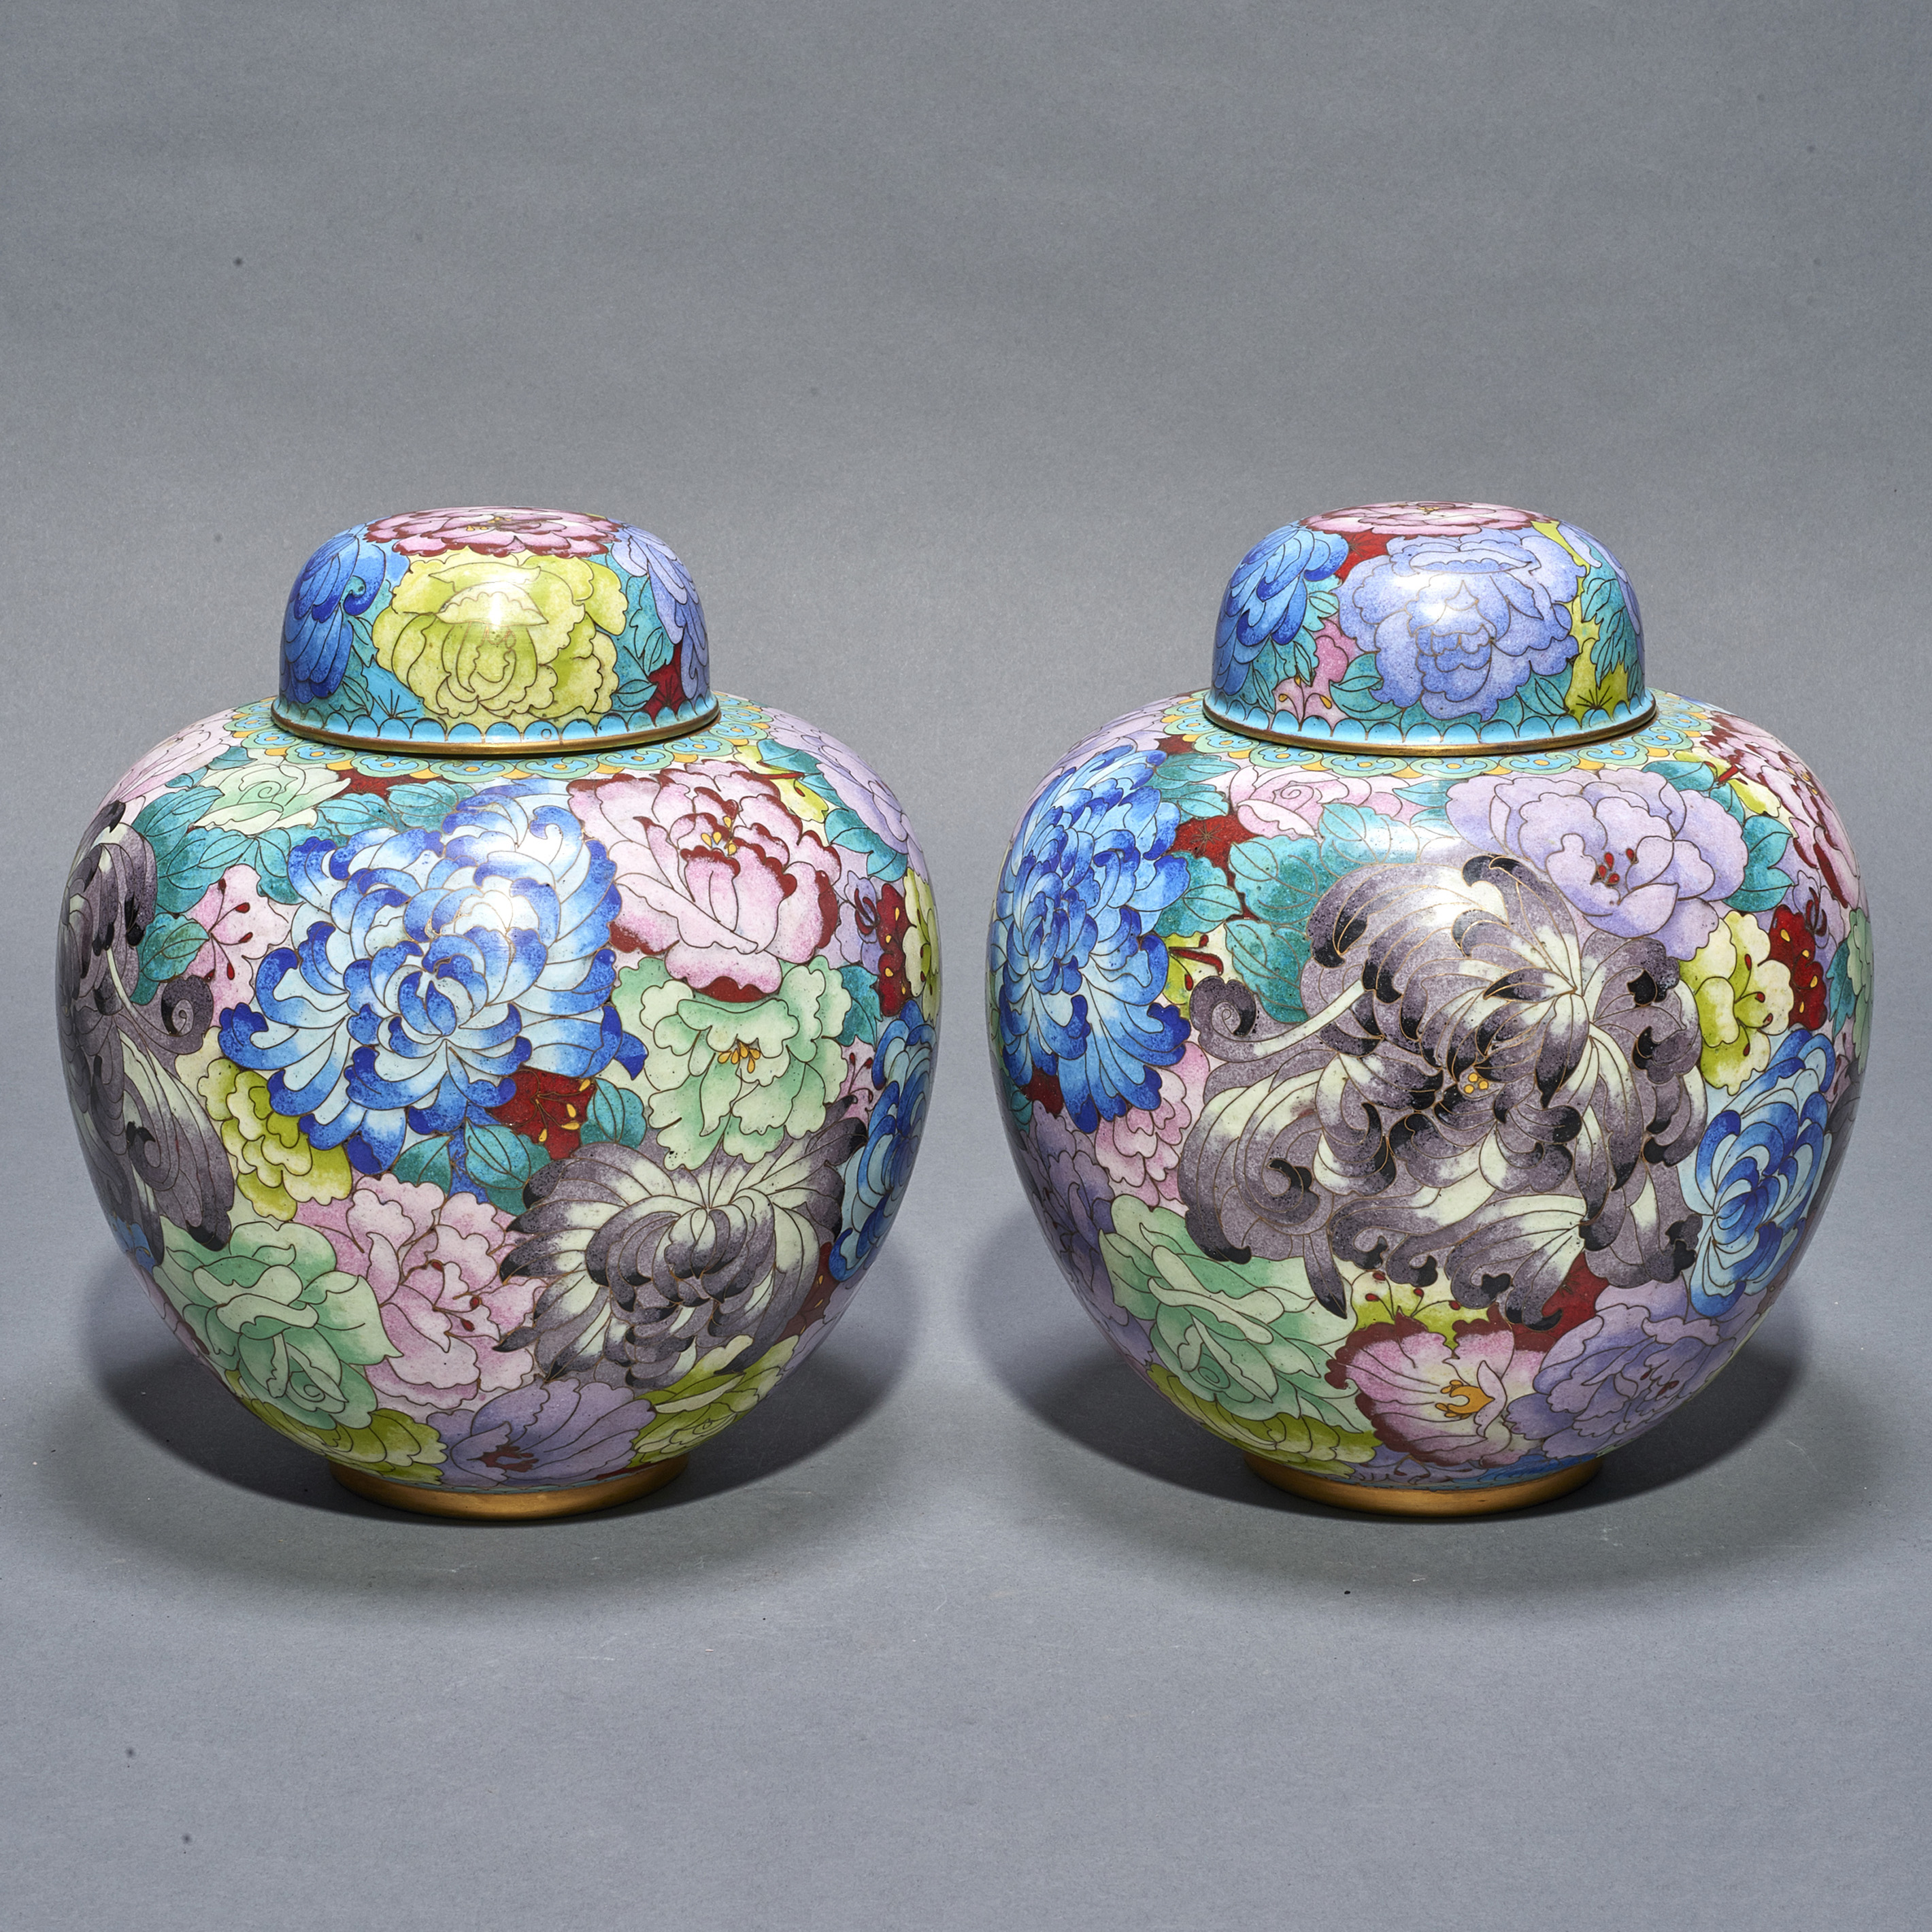 PAIR OF CHINESE CLOISONNE MILLEFLEUR